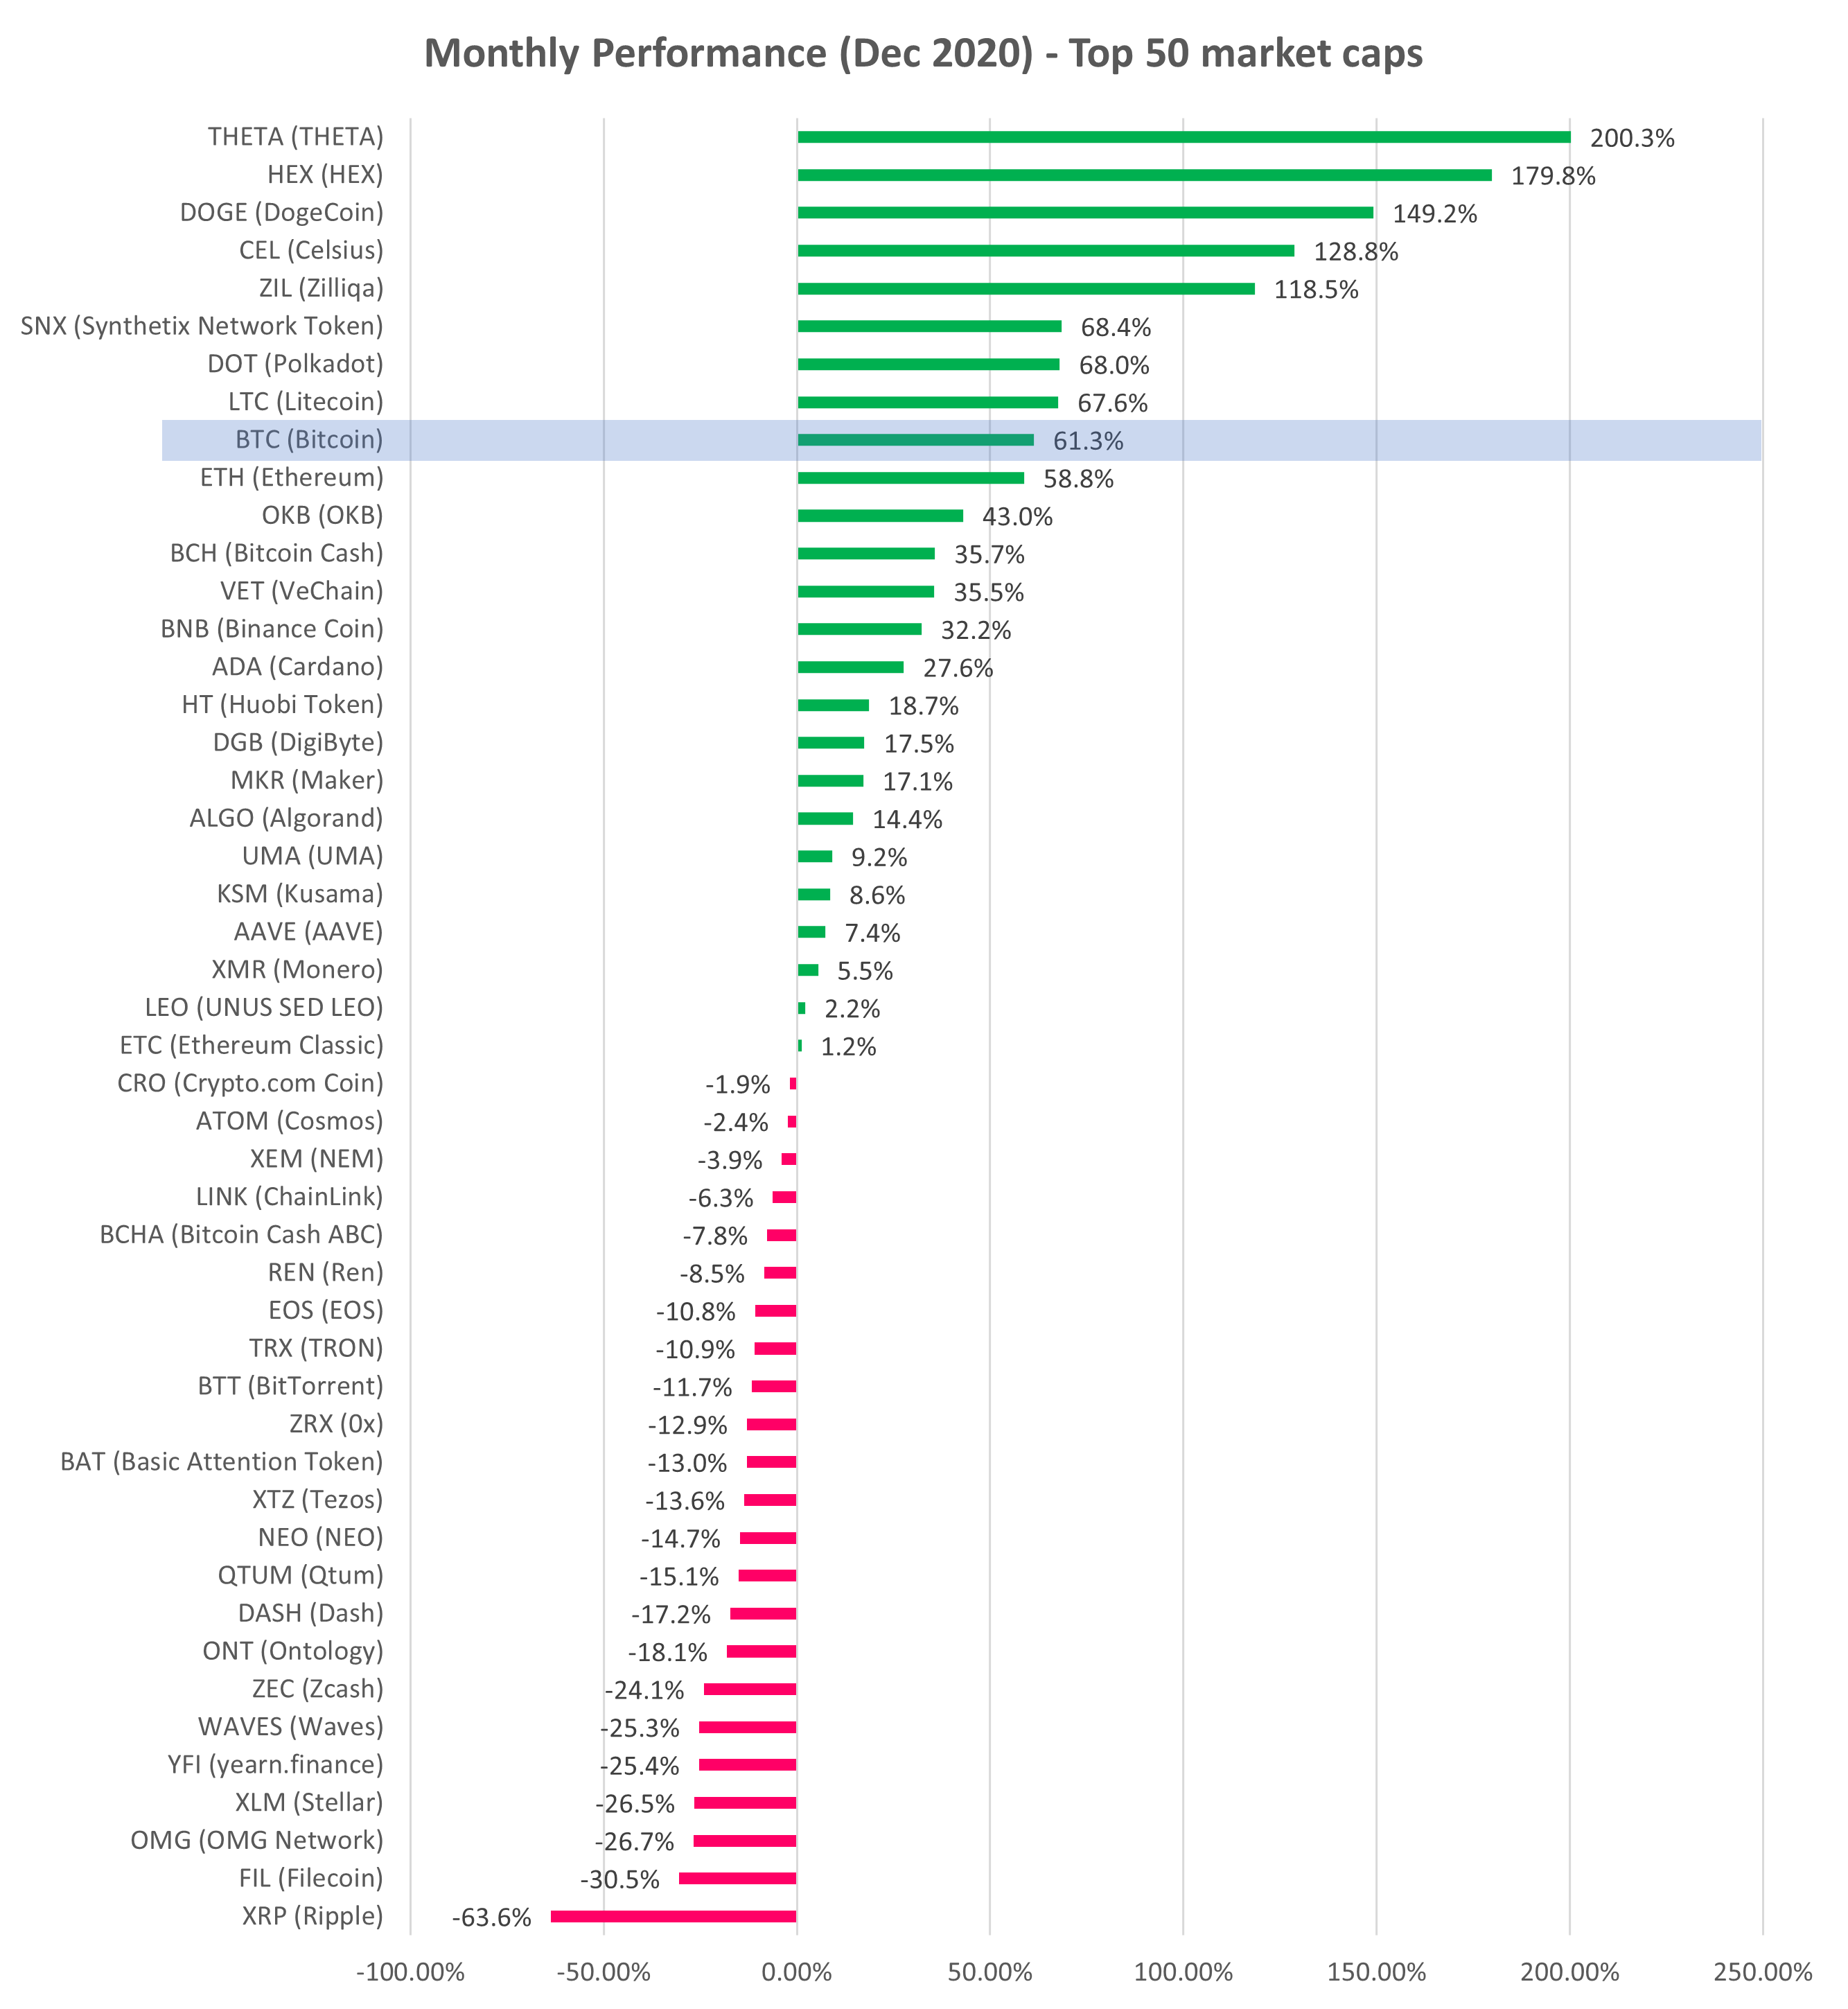 Top cryptocurrencies price performance for December 2020